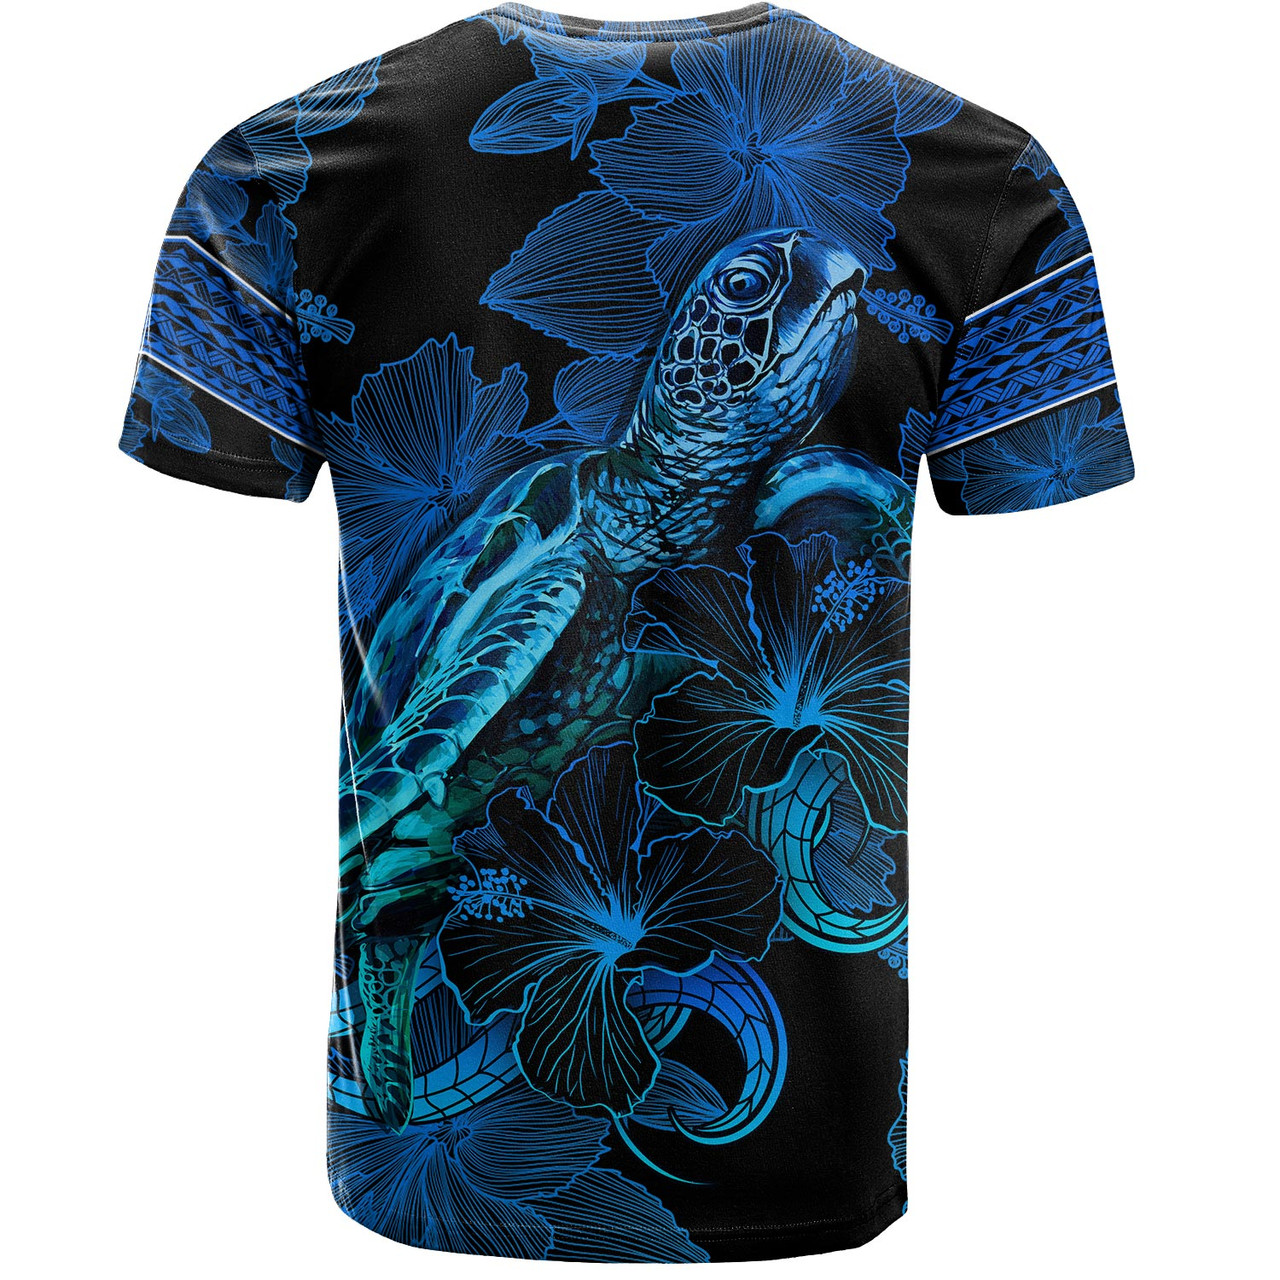 Austral Islands T-Shirt Sea Turtle With Blooming Hibiscus Flowers Tribal Blue